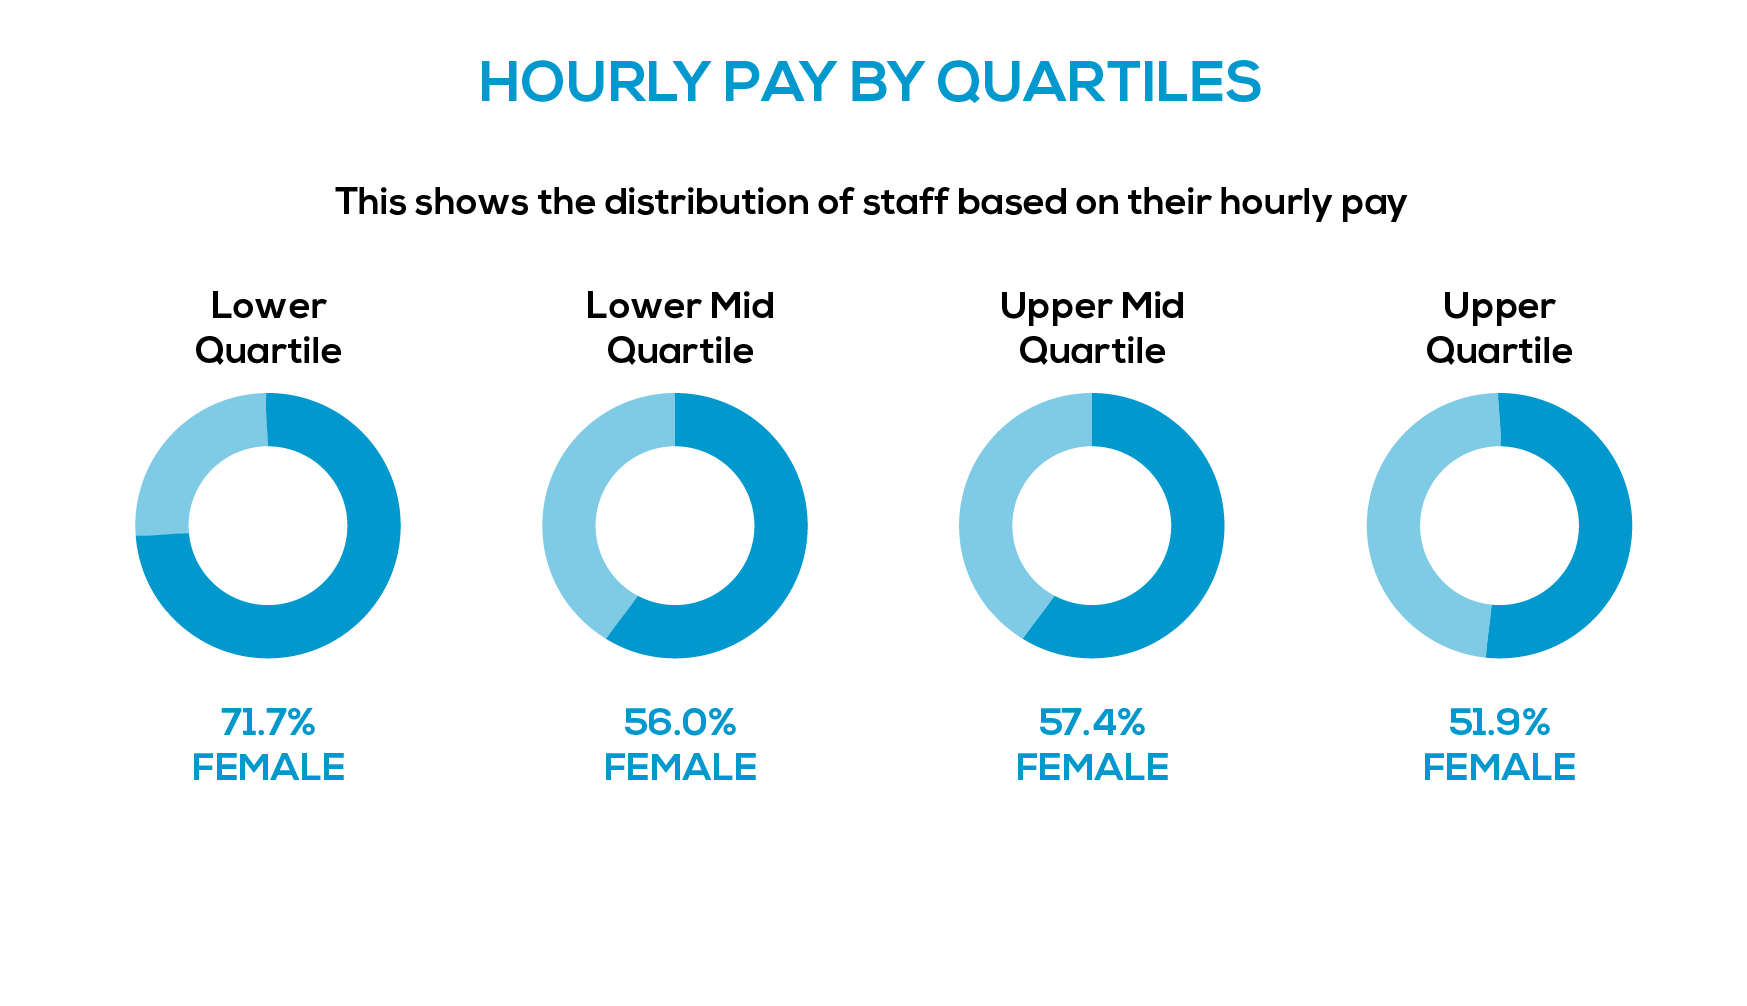 Hourly Pay by Quartile: Lower Quartile: 28.3% Male; 71.7% Female. Lower Mid Quartile: 44.0% Male; 56.0% Female. Upper Mid Quartile: 42.6% Male; 57.4% Female. Upper Quartile: 48.1% Male; 51.9% Female.